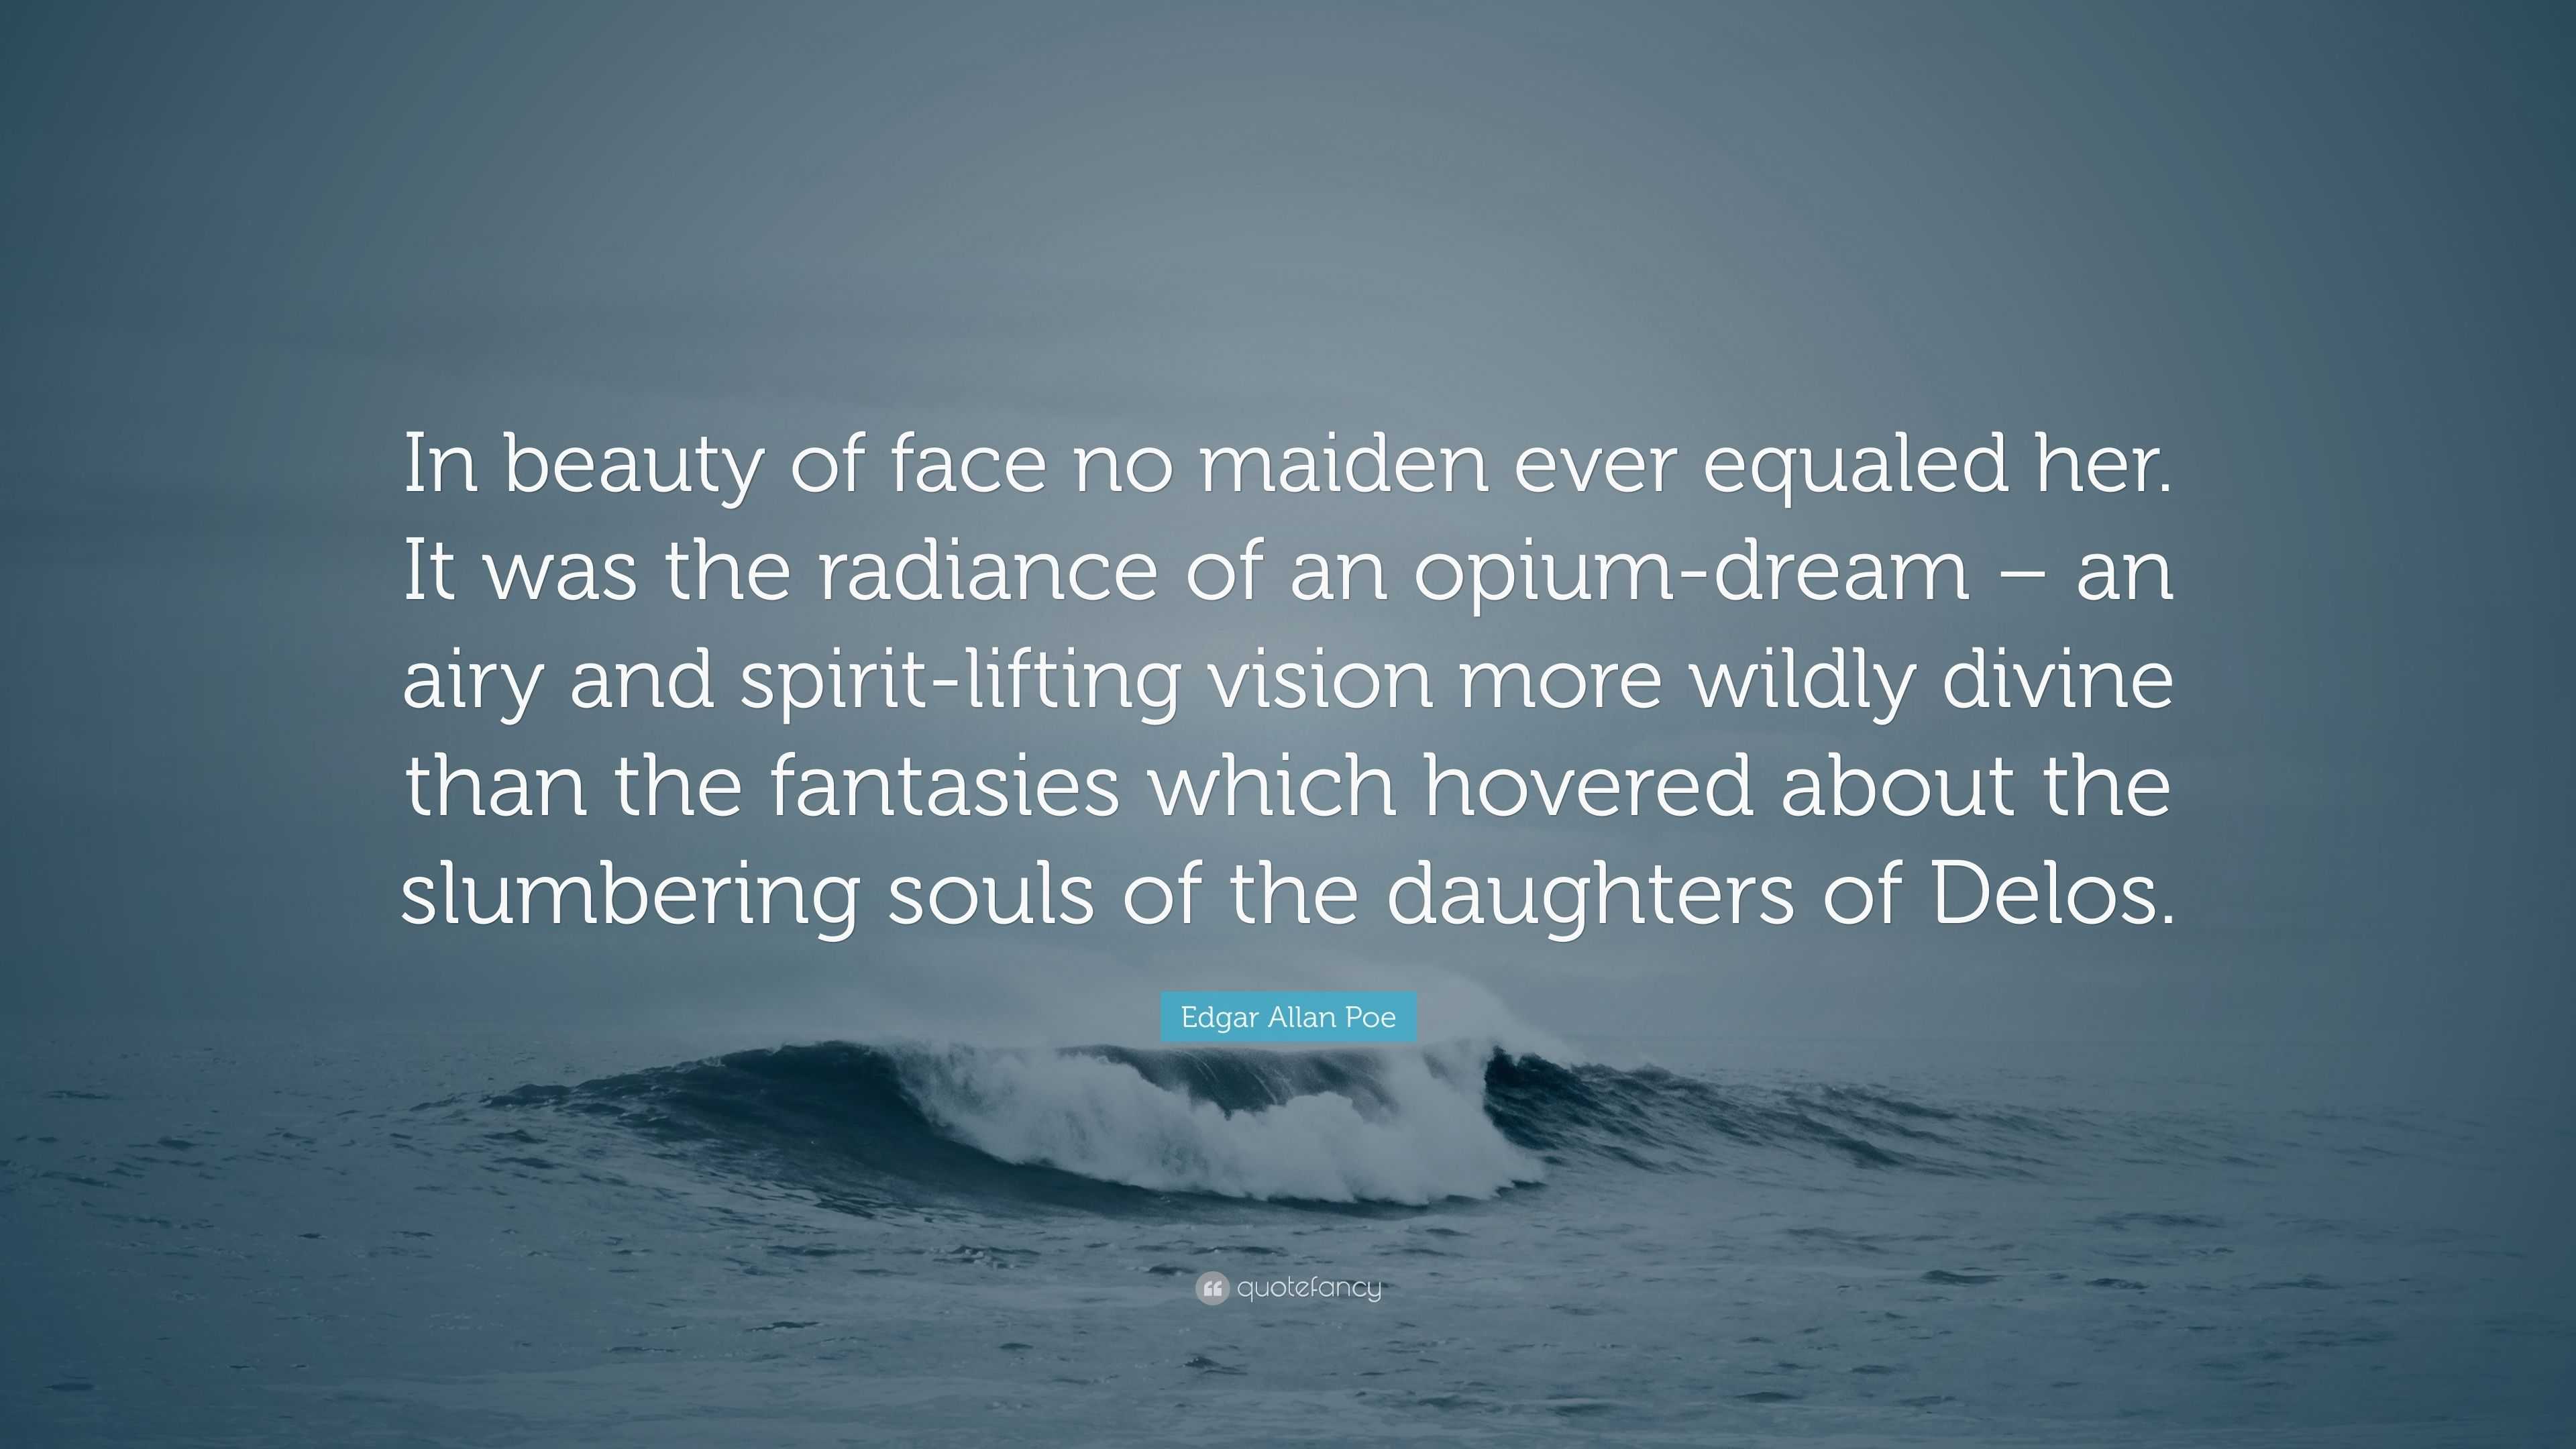 https://quotefancy.com/media/wallpaper/3840x2160/5028846-Edgar-Allan-Poe-Quote-In-beauty-of-face-no-maiden-ever-equaled-her.jpg